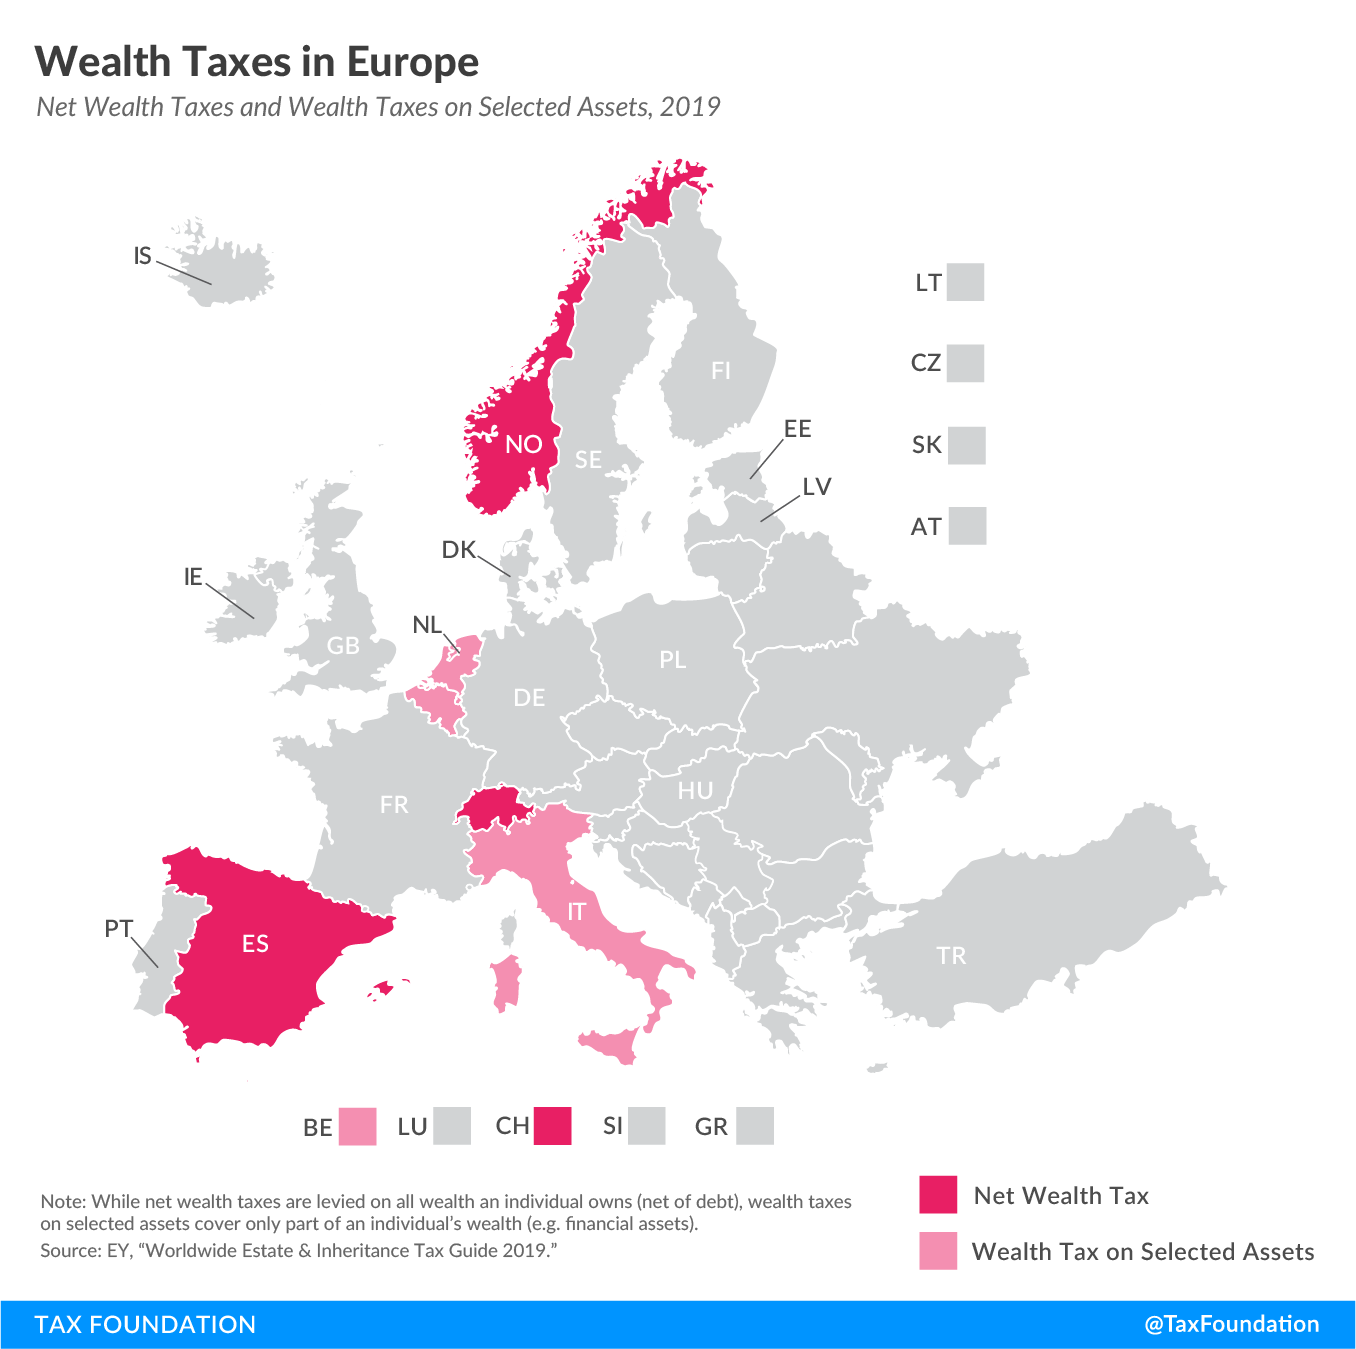 Wealth taxes in Europe include a Norway wealth tax, Spain wealth tax, Switzerland wealth tax, Belgium wealth tax, Italy wealth tax, and Netherlands wealth tax